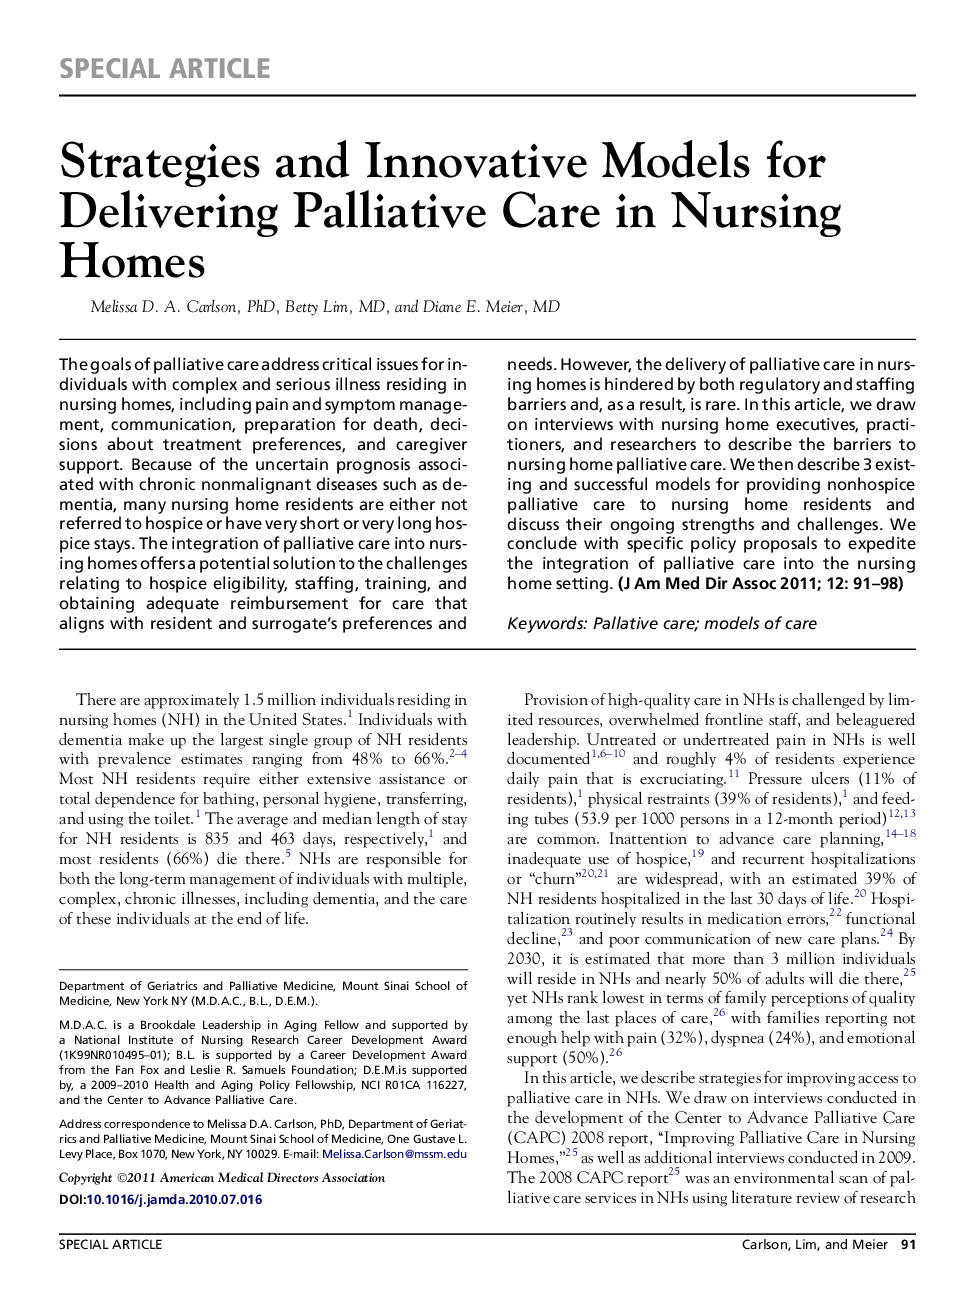 Strategies and Innovative Models for Delivering Palliative Care in Nursing Homes